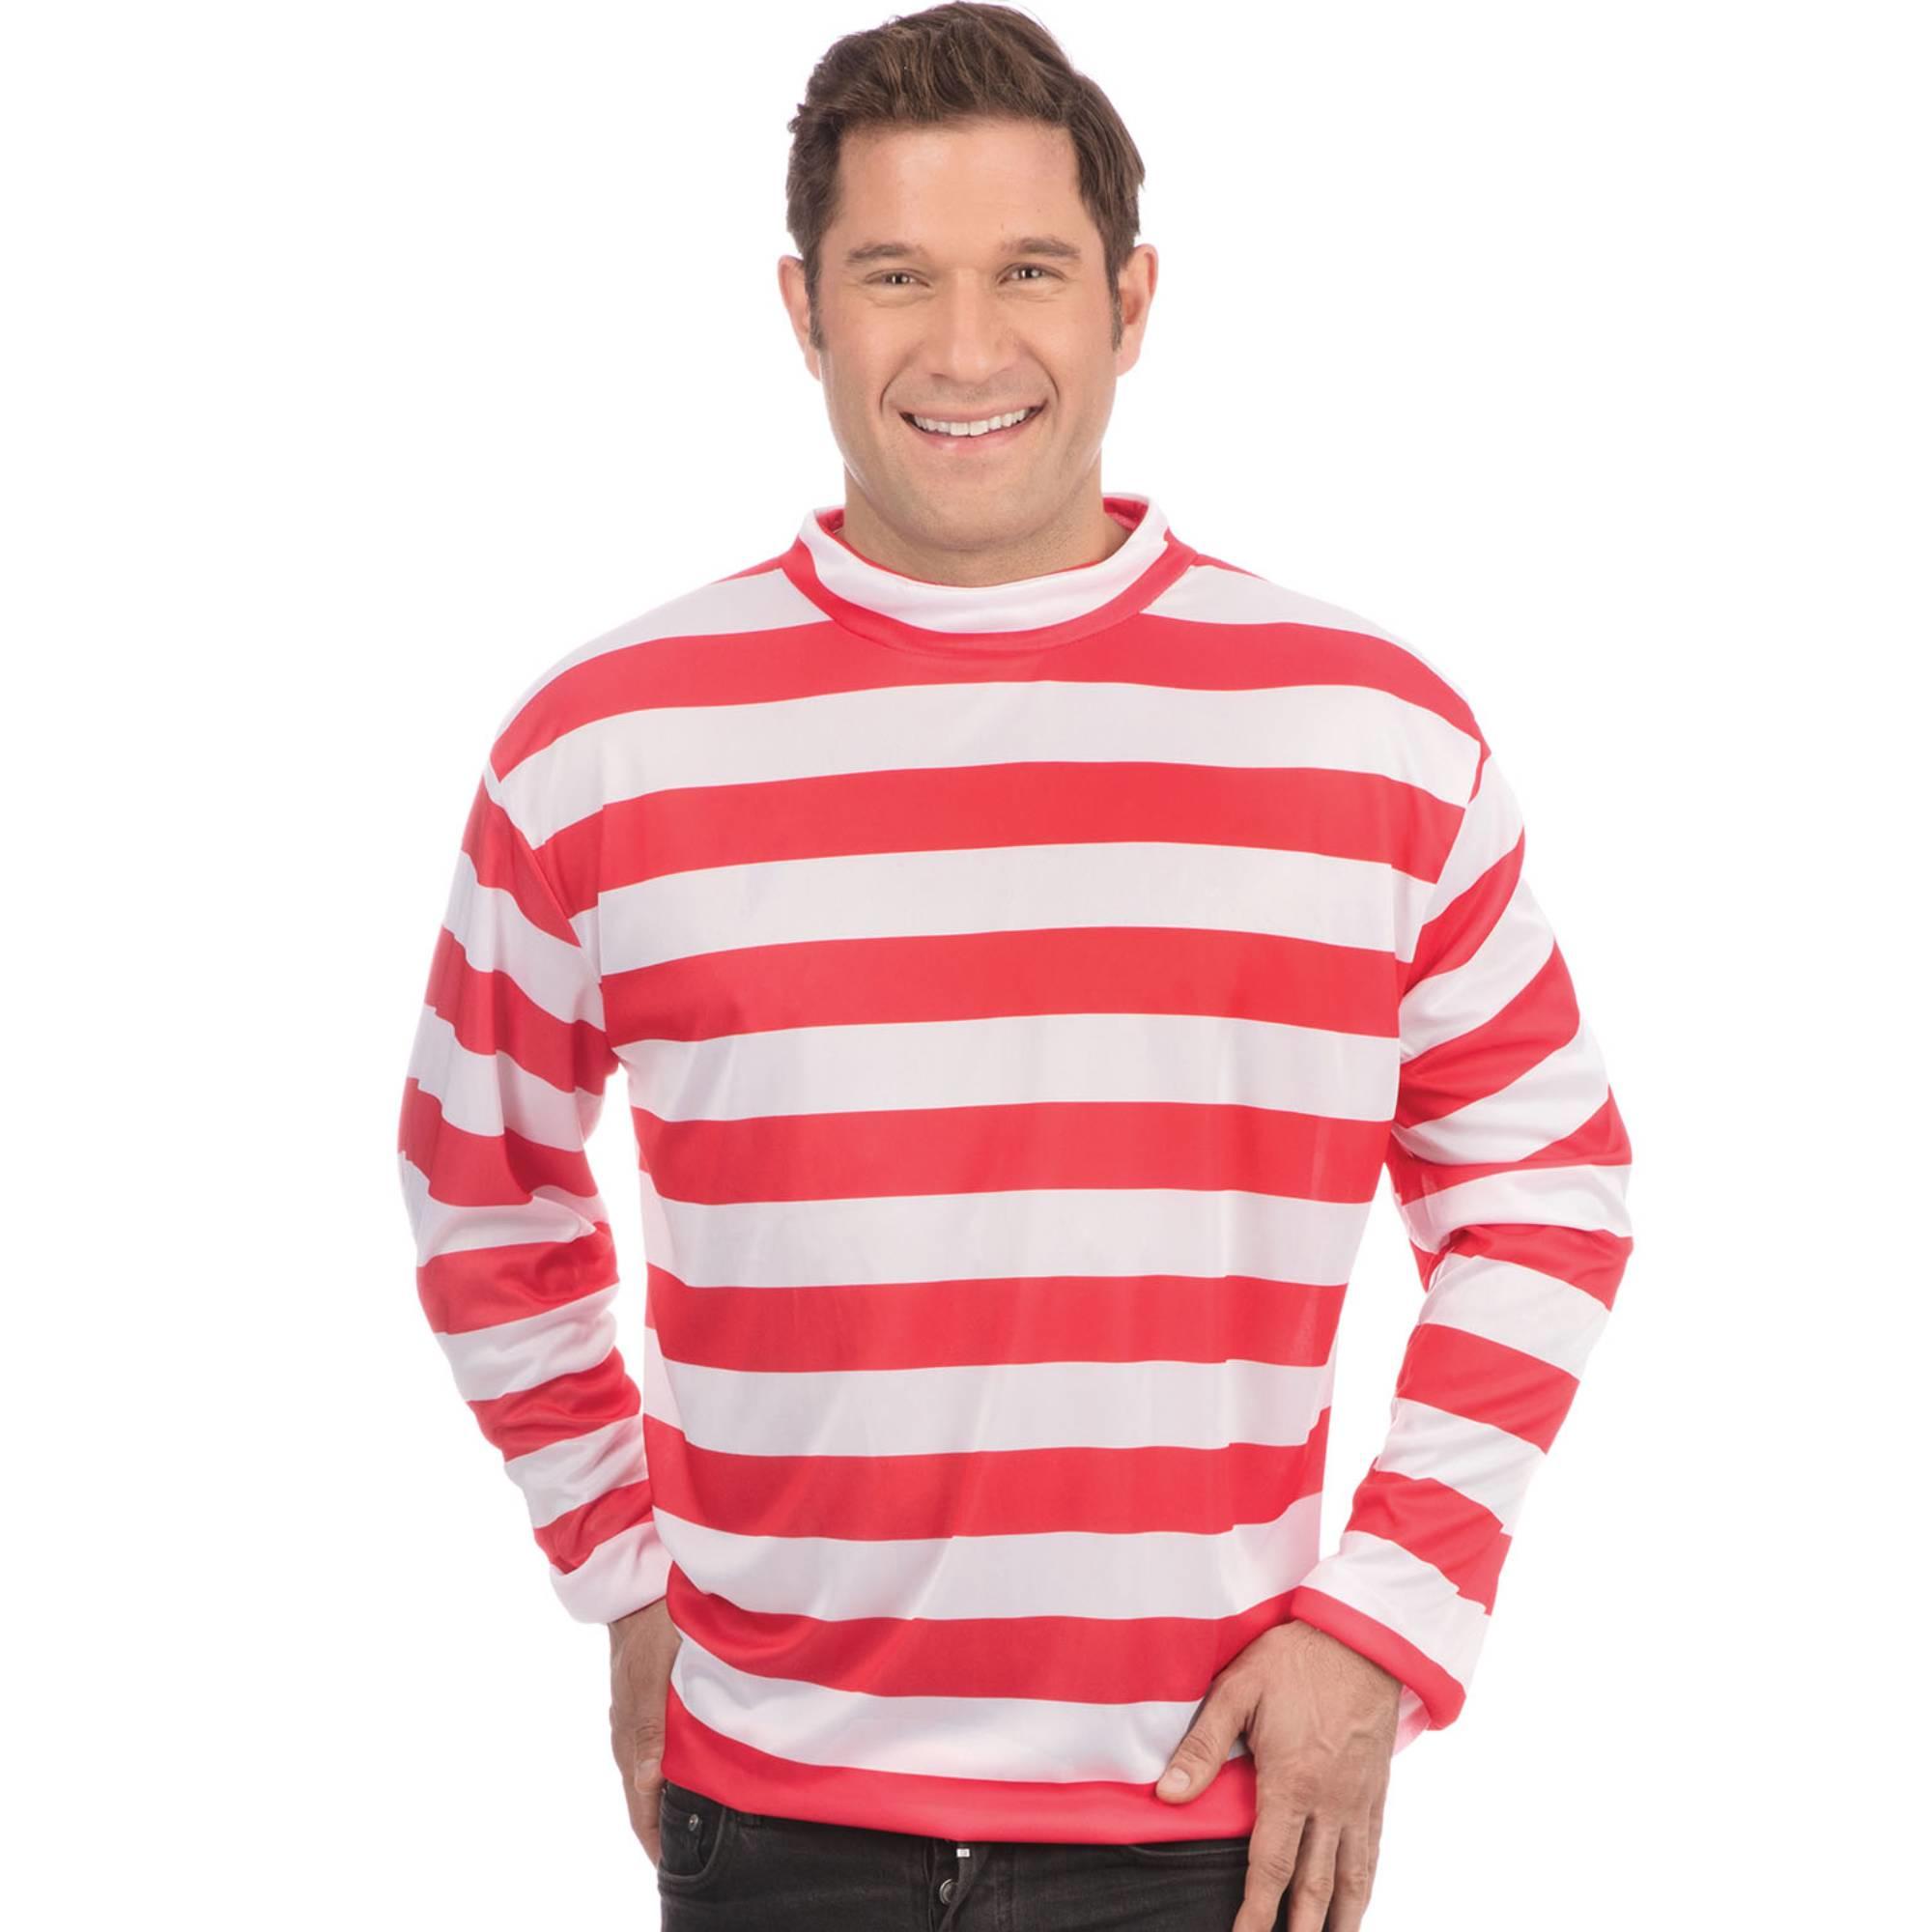 Red and White Striped Costume Top for Men by Bristol Novelties AC175 available here a\ Karnival Costumes online party shop